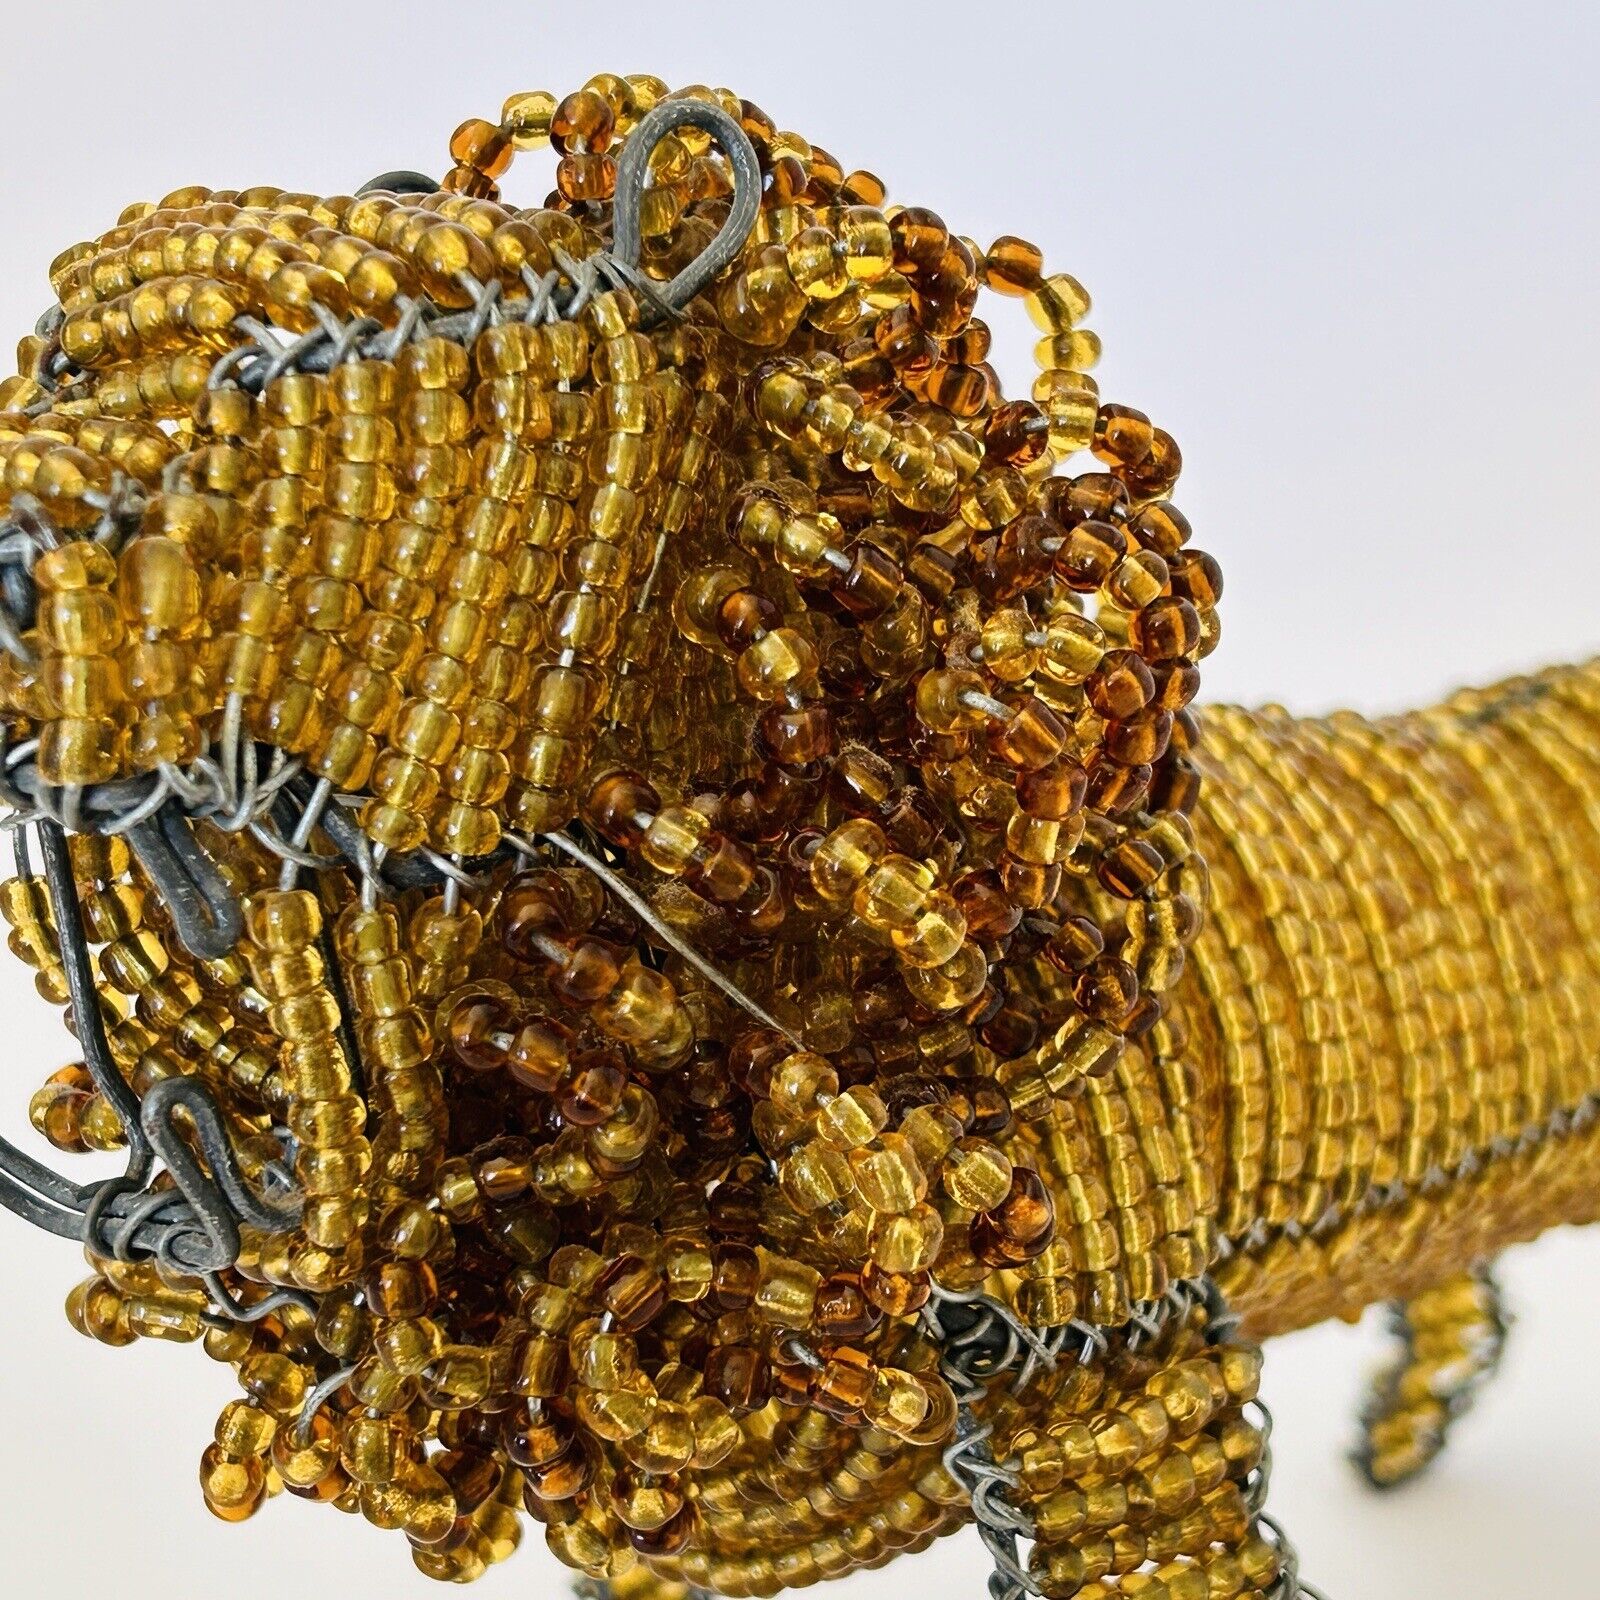 Vintage Retro Lion Glass Bead and Wire Sculpture Figurine African Jungle Unique - Flexi Africa - Free Delivery Worldwide only at www.flexiafrica.com